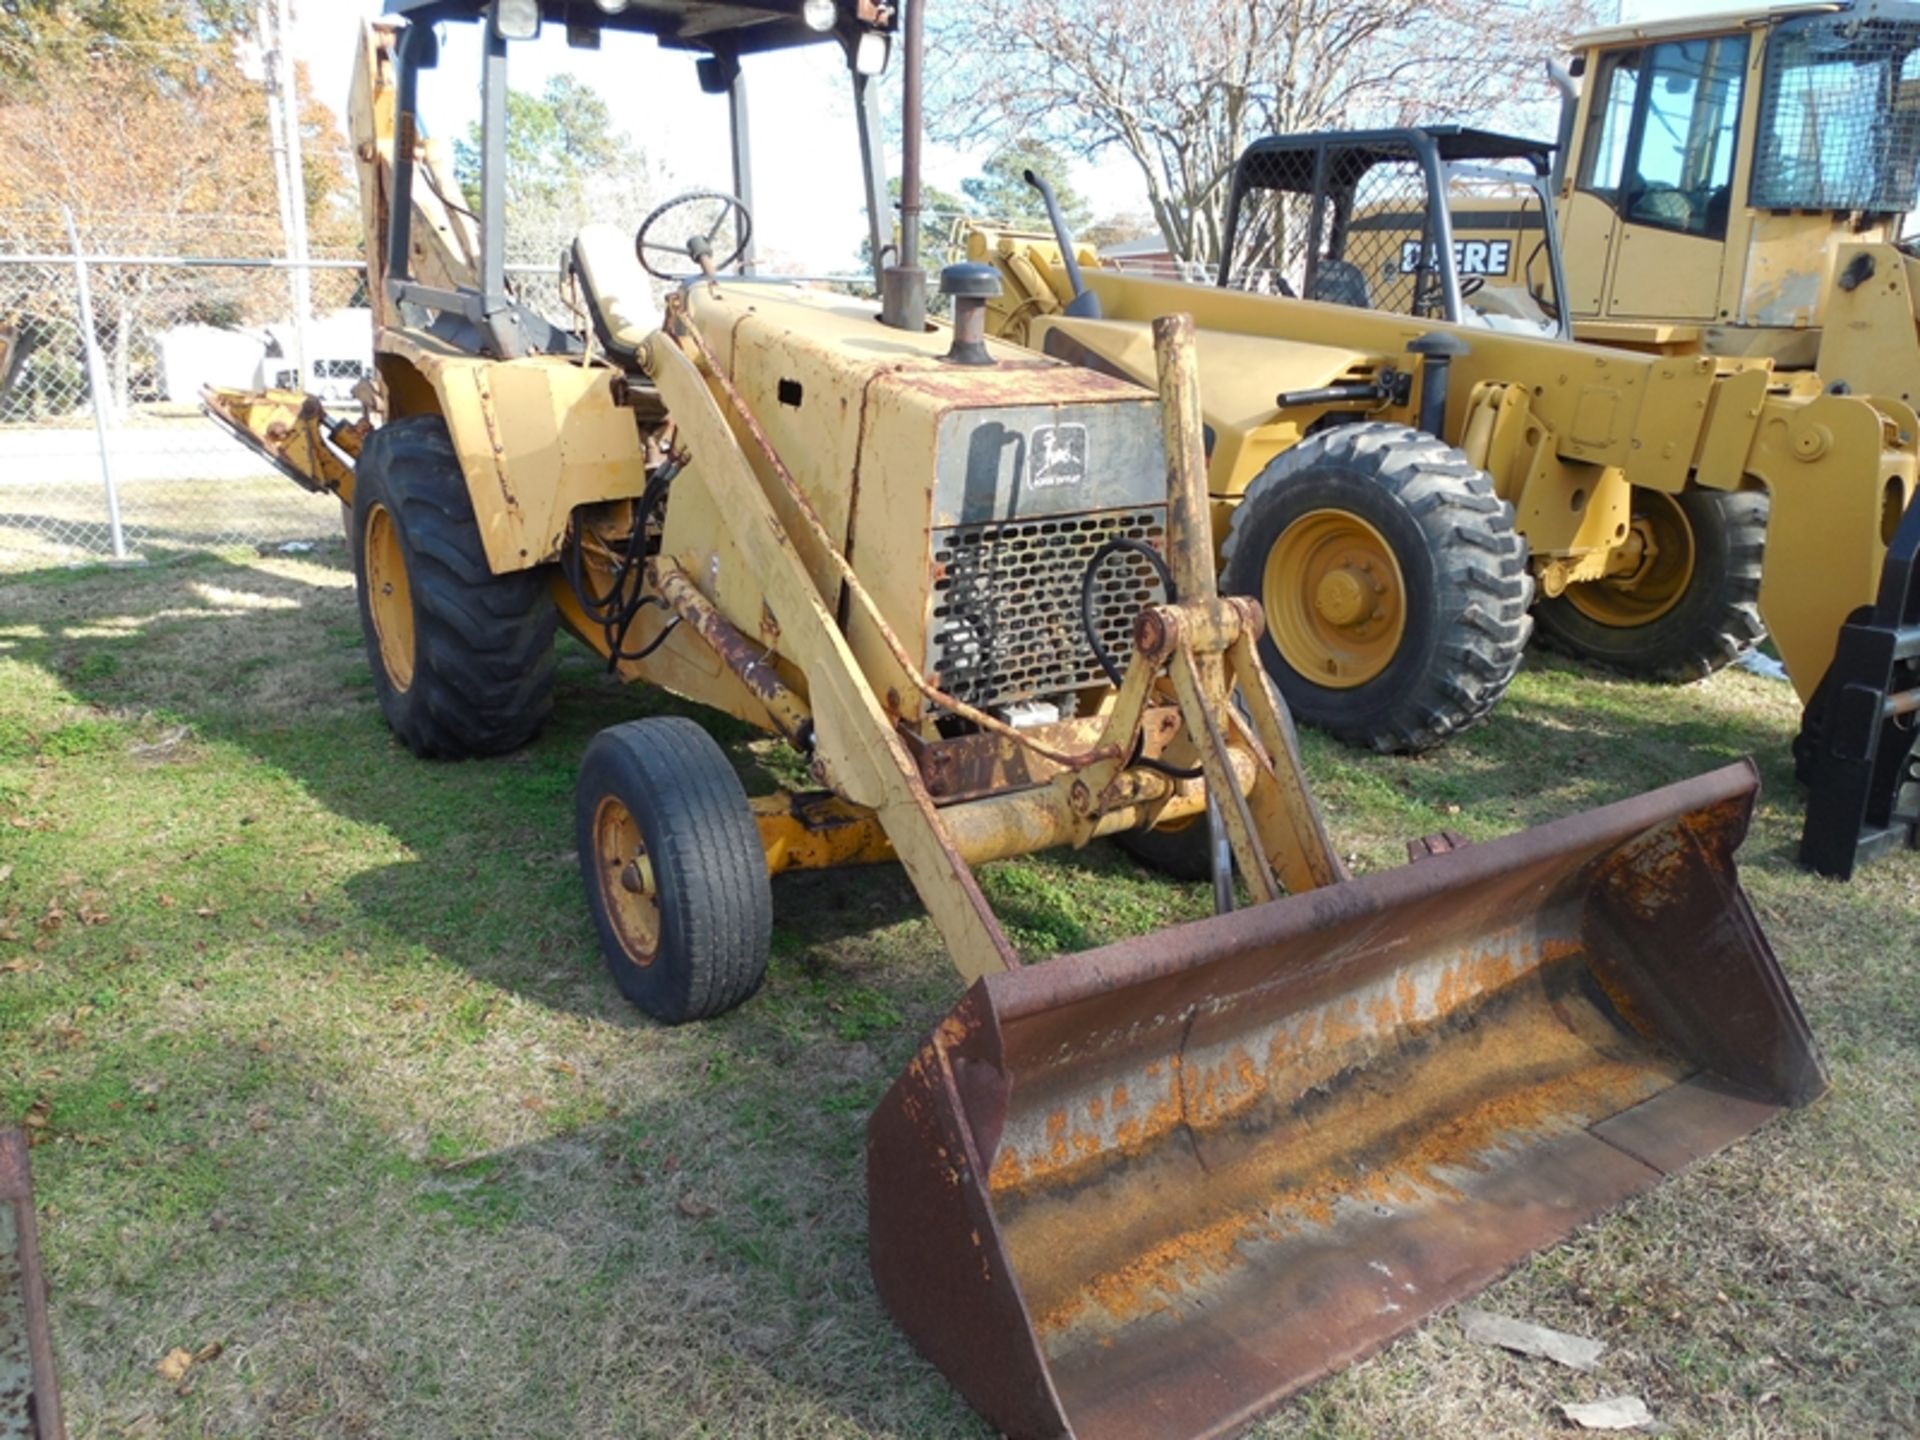 JD 210C backhoe TO210CA725953 hrs unknown hrs unknown